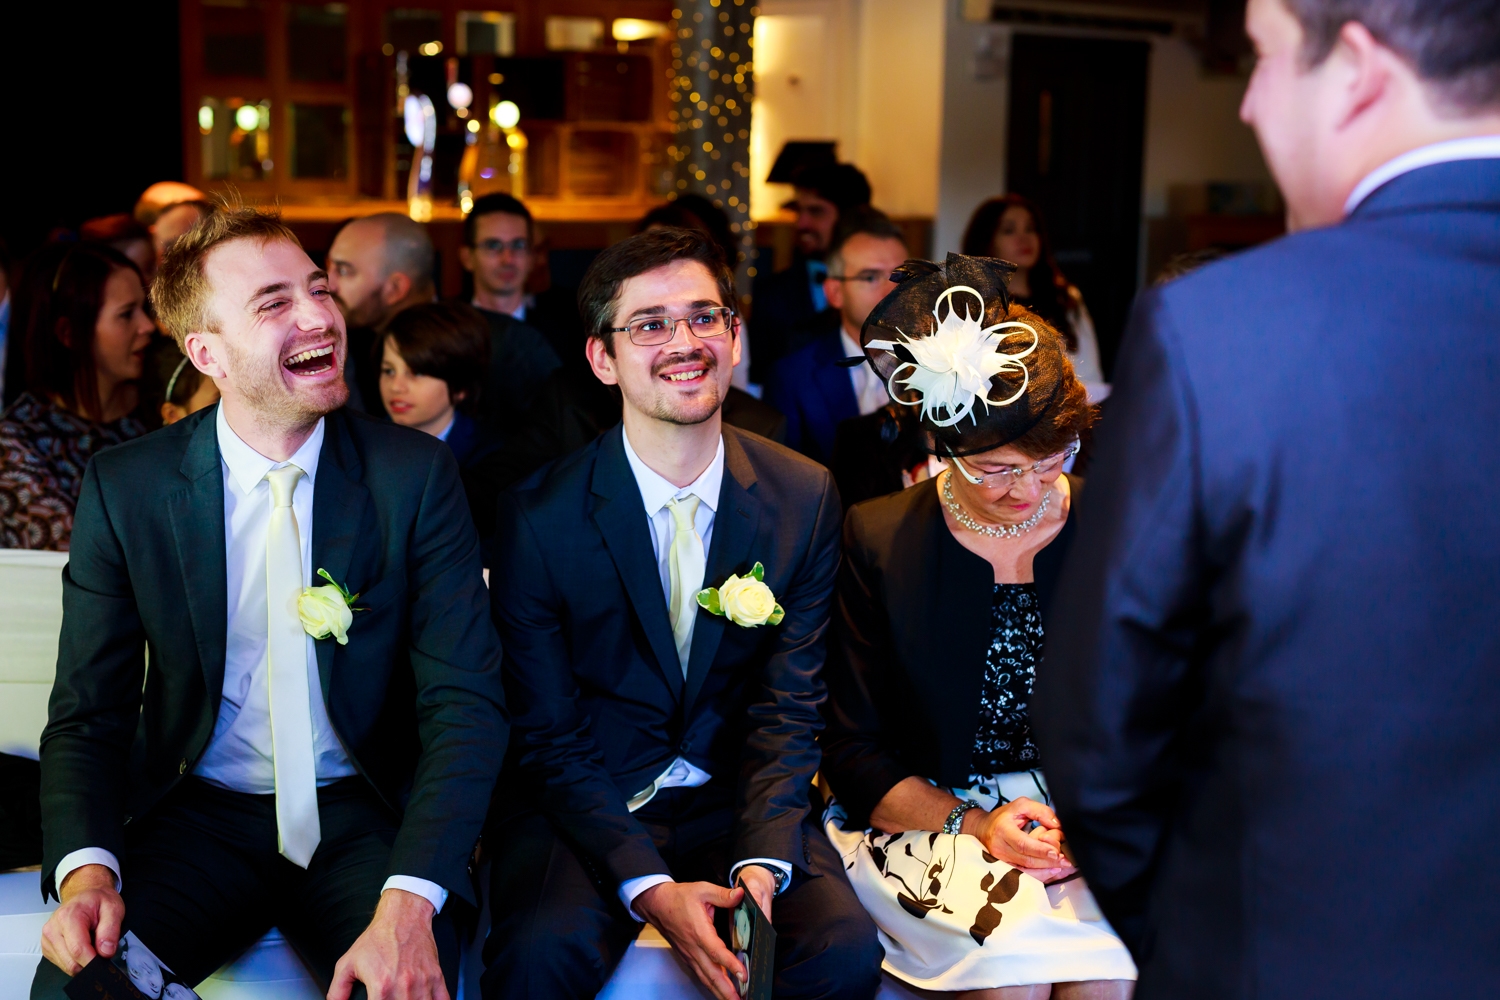 Saxon Mill Wedding Photographer - groomsman laughing and joking with the groom